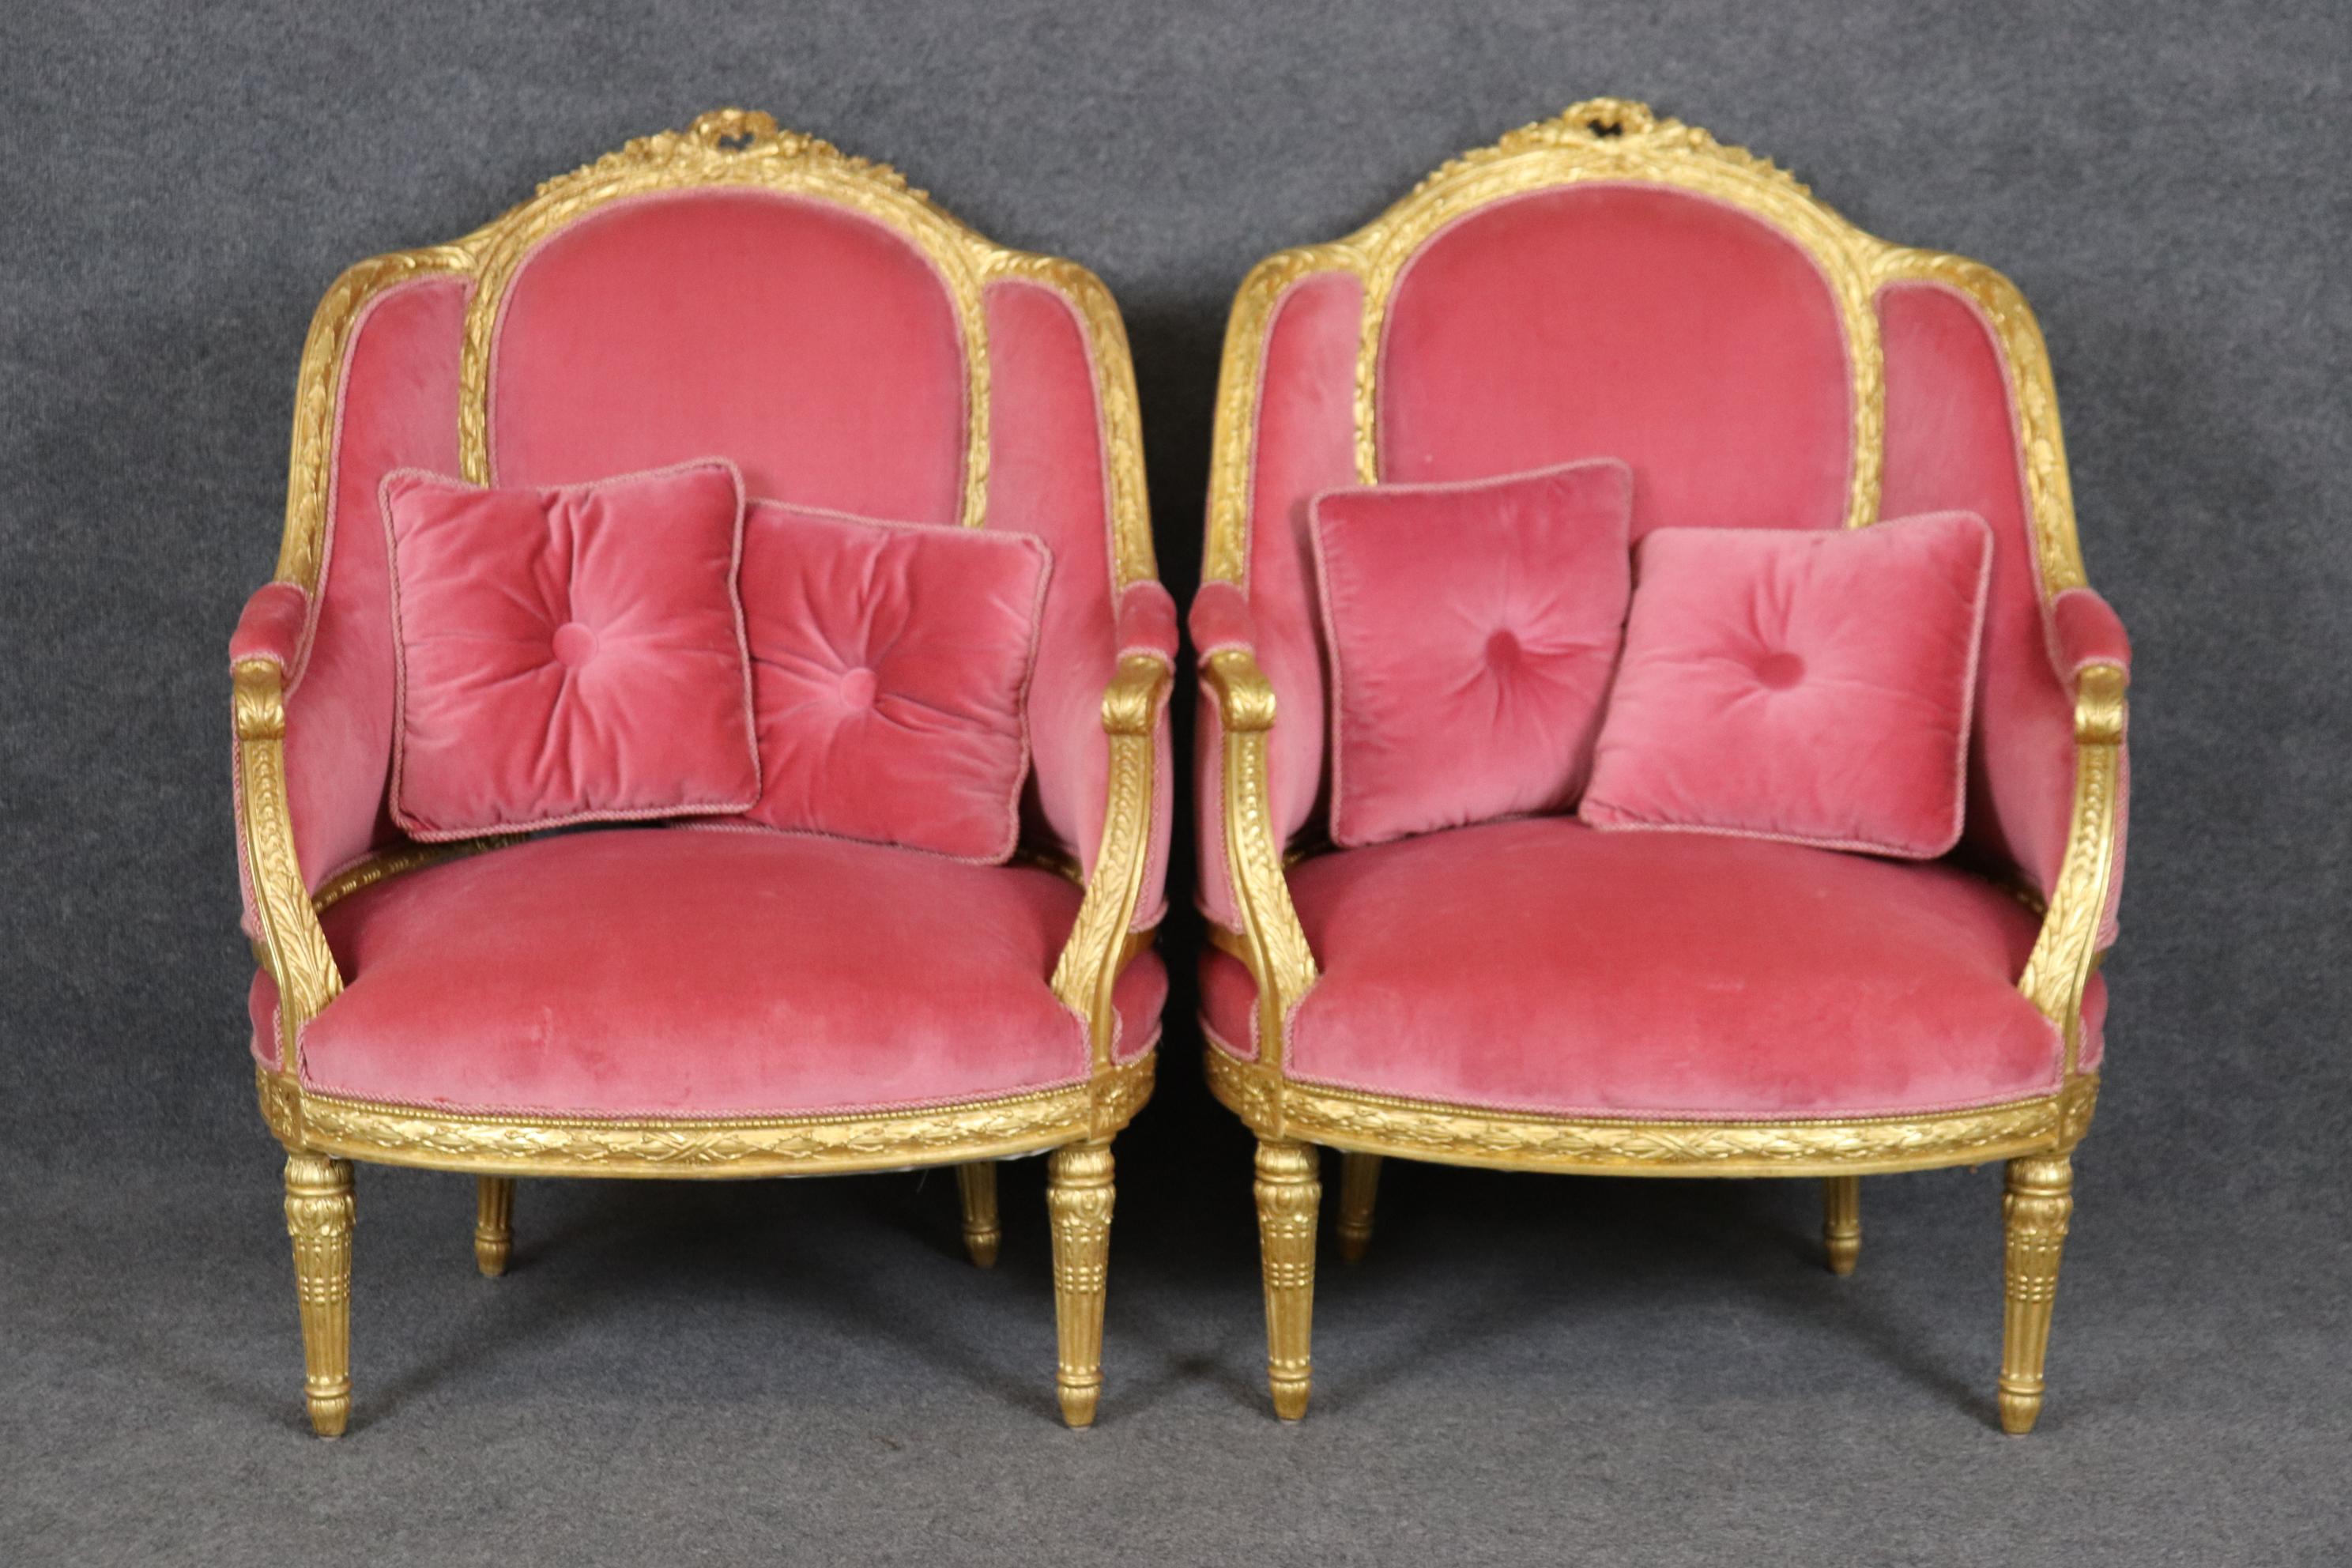 This is a gorgeous pair of rose velvet expertly carved French-made pair of bergere chairs. The chairs are some of the finest we have ever had. The gold is rich and luminous and in good condition. These chairs show only minor signs of wear and use.